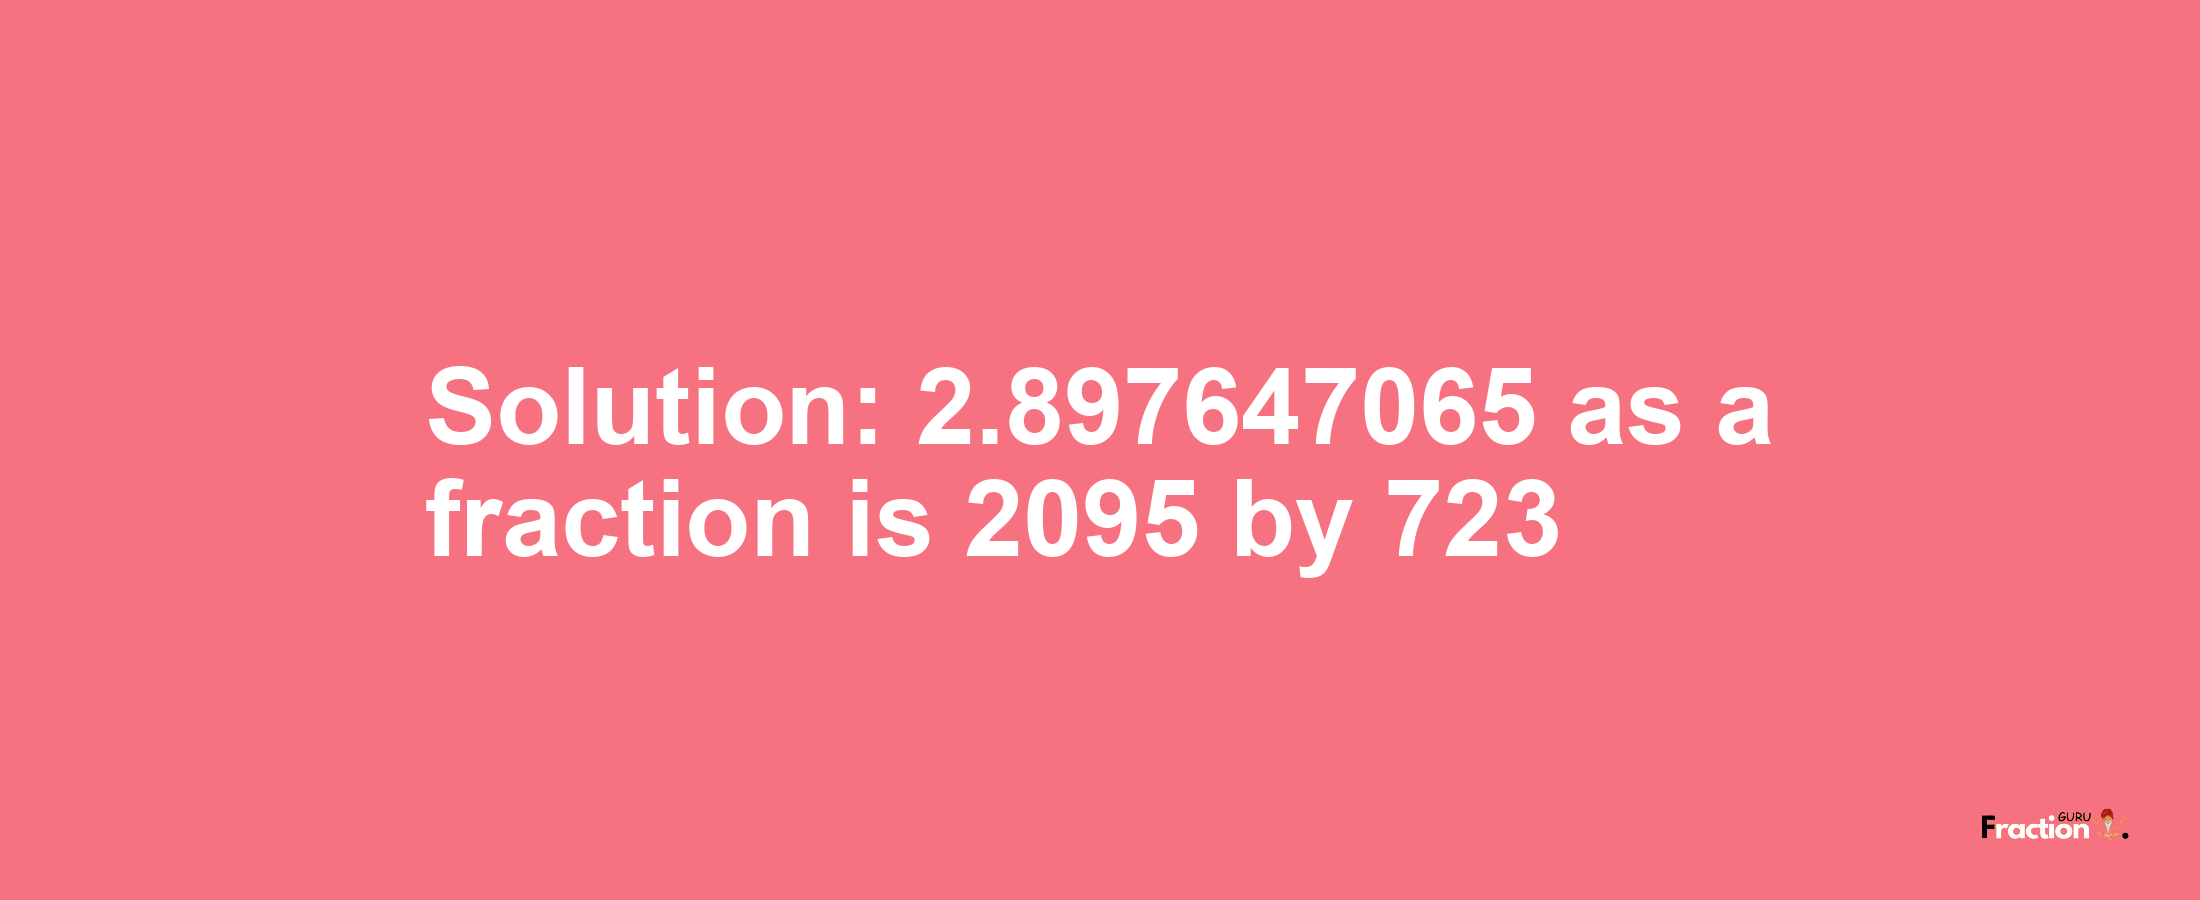 Solution:2.897647065 as a fraction is 2095/723